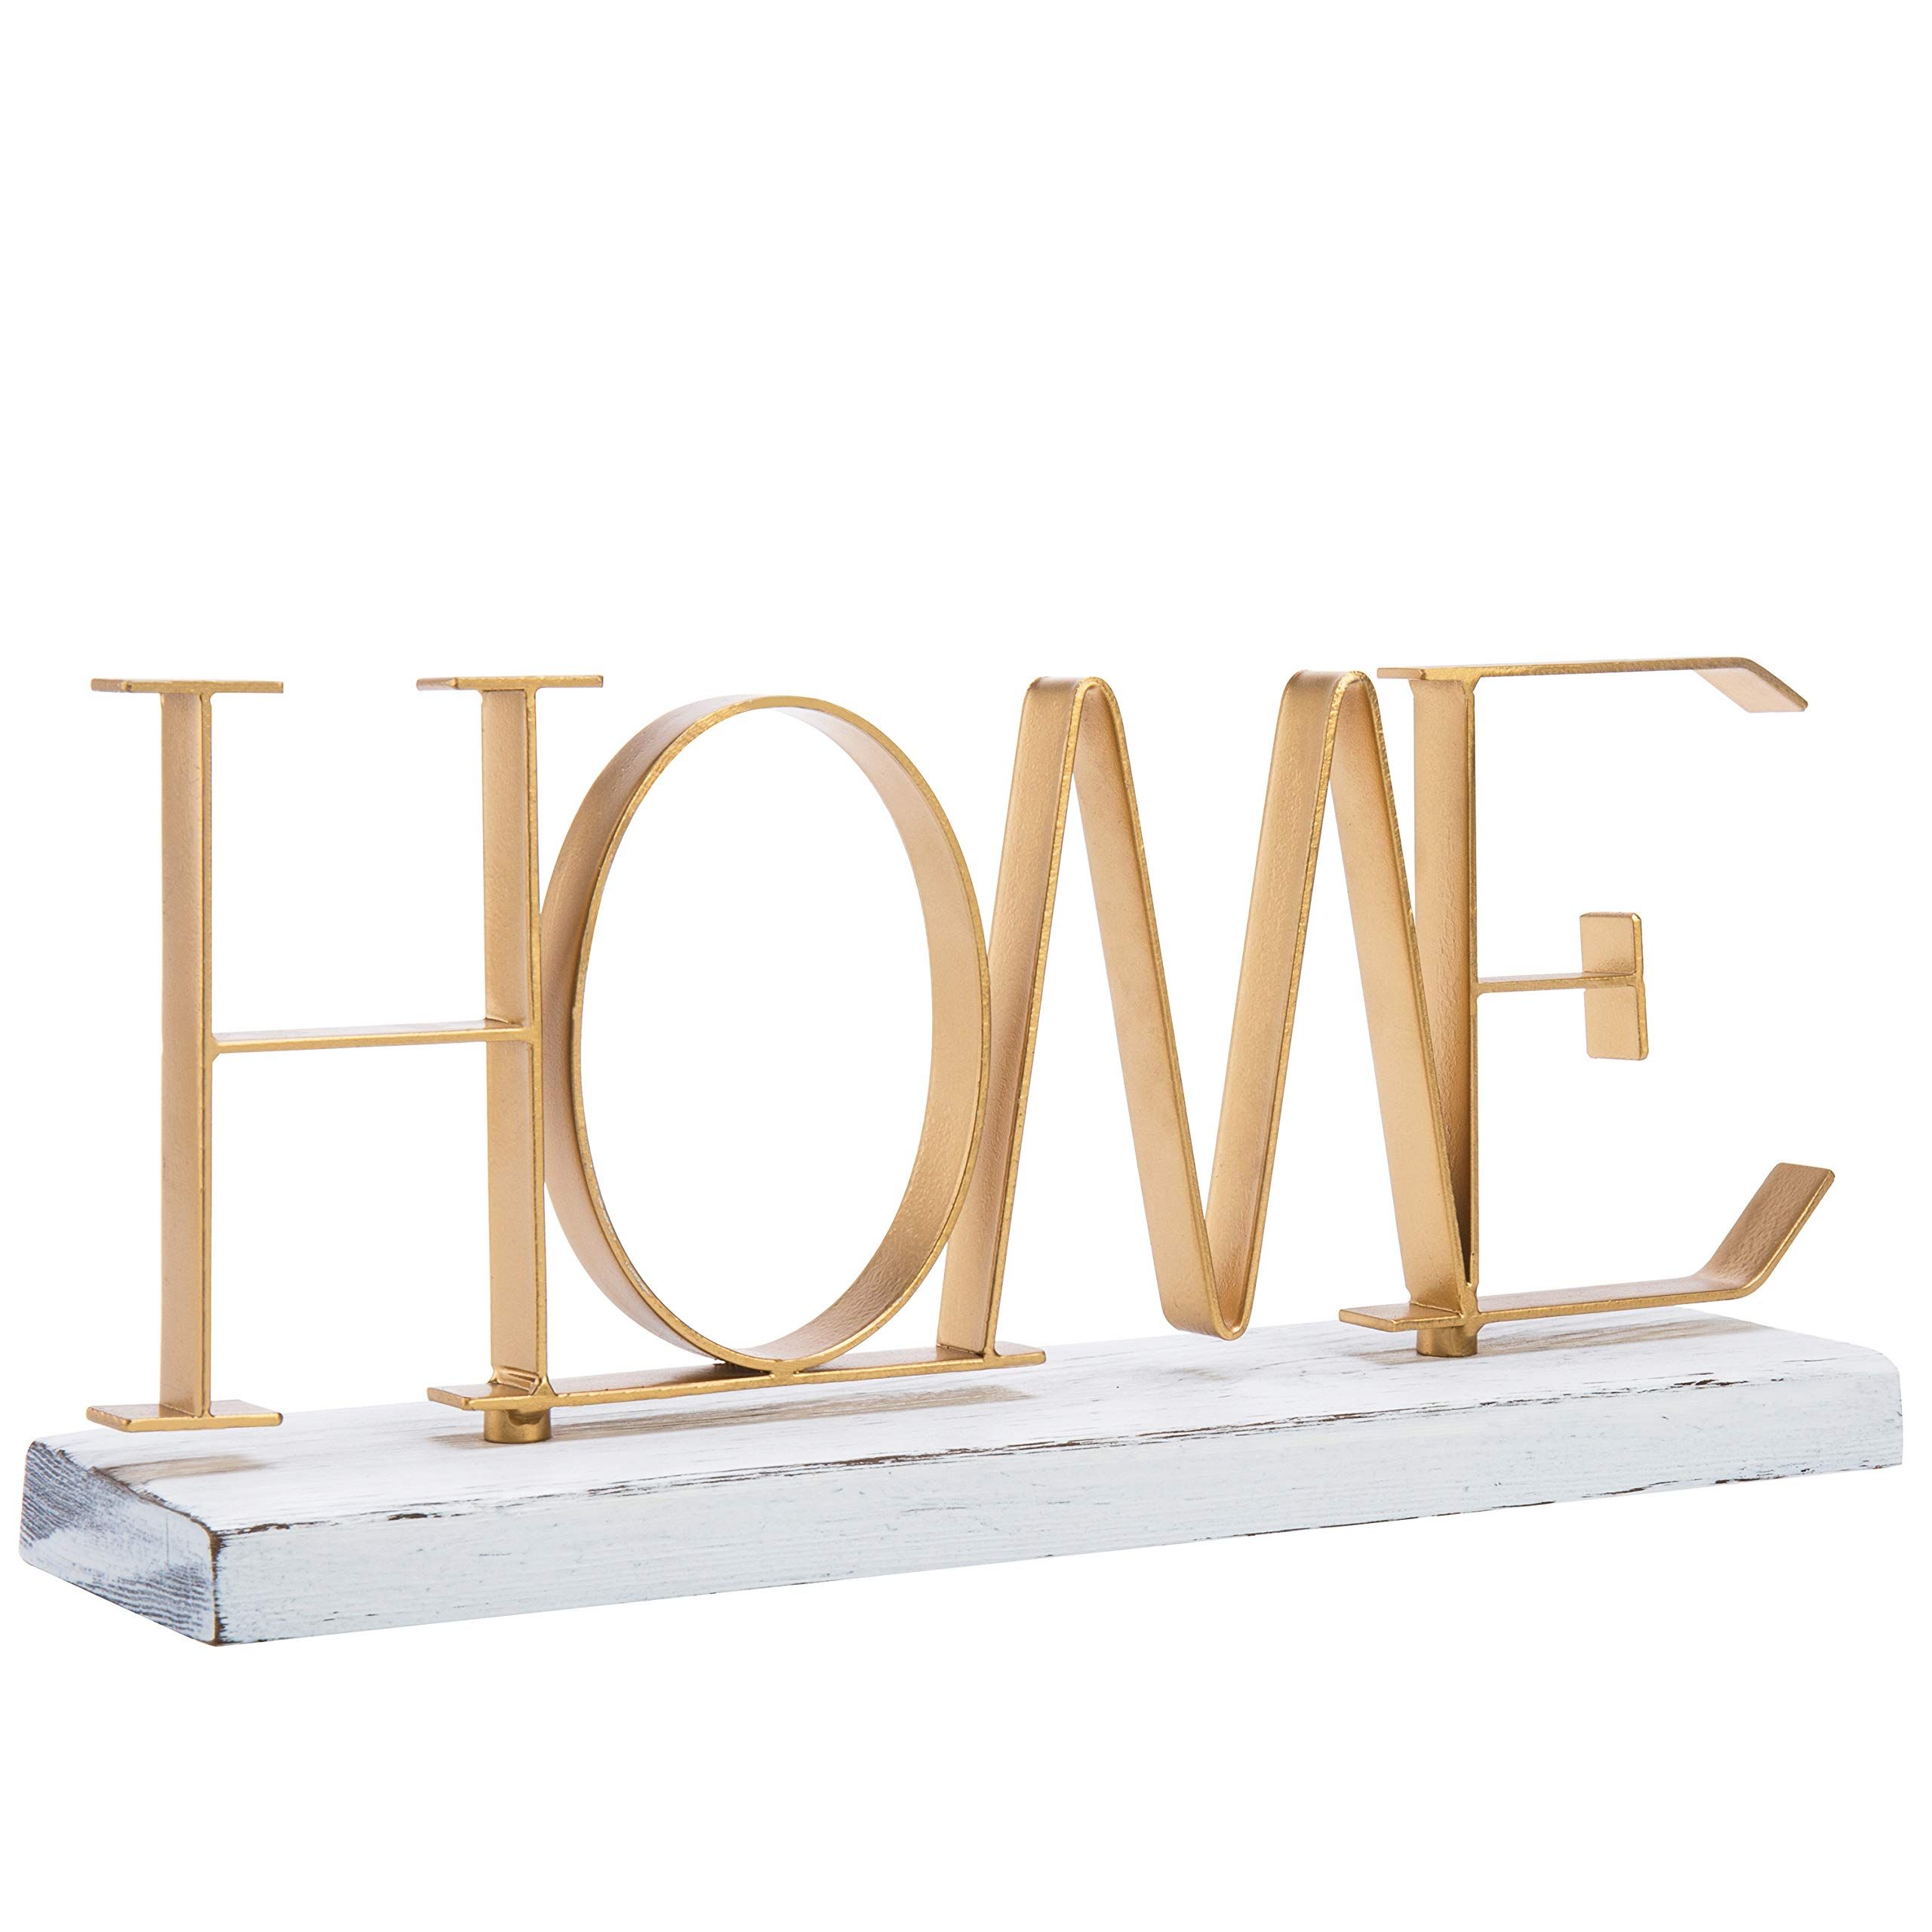 MyGift Home Gold-Tone Metal Letter Decorative Sign with Whitewashed Wood Base, 12 Inch | Amazon (US)